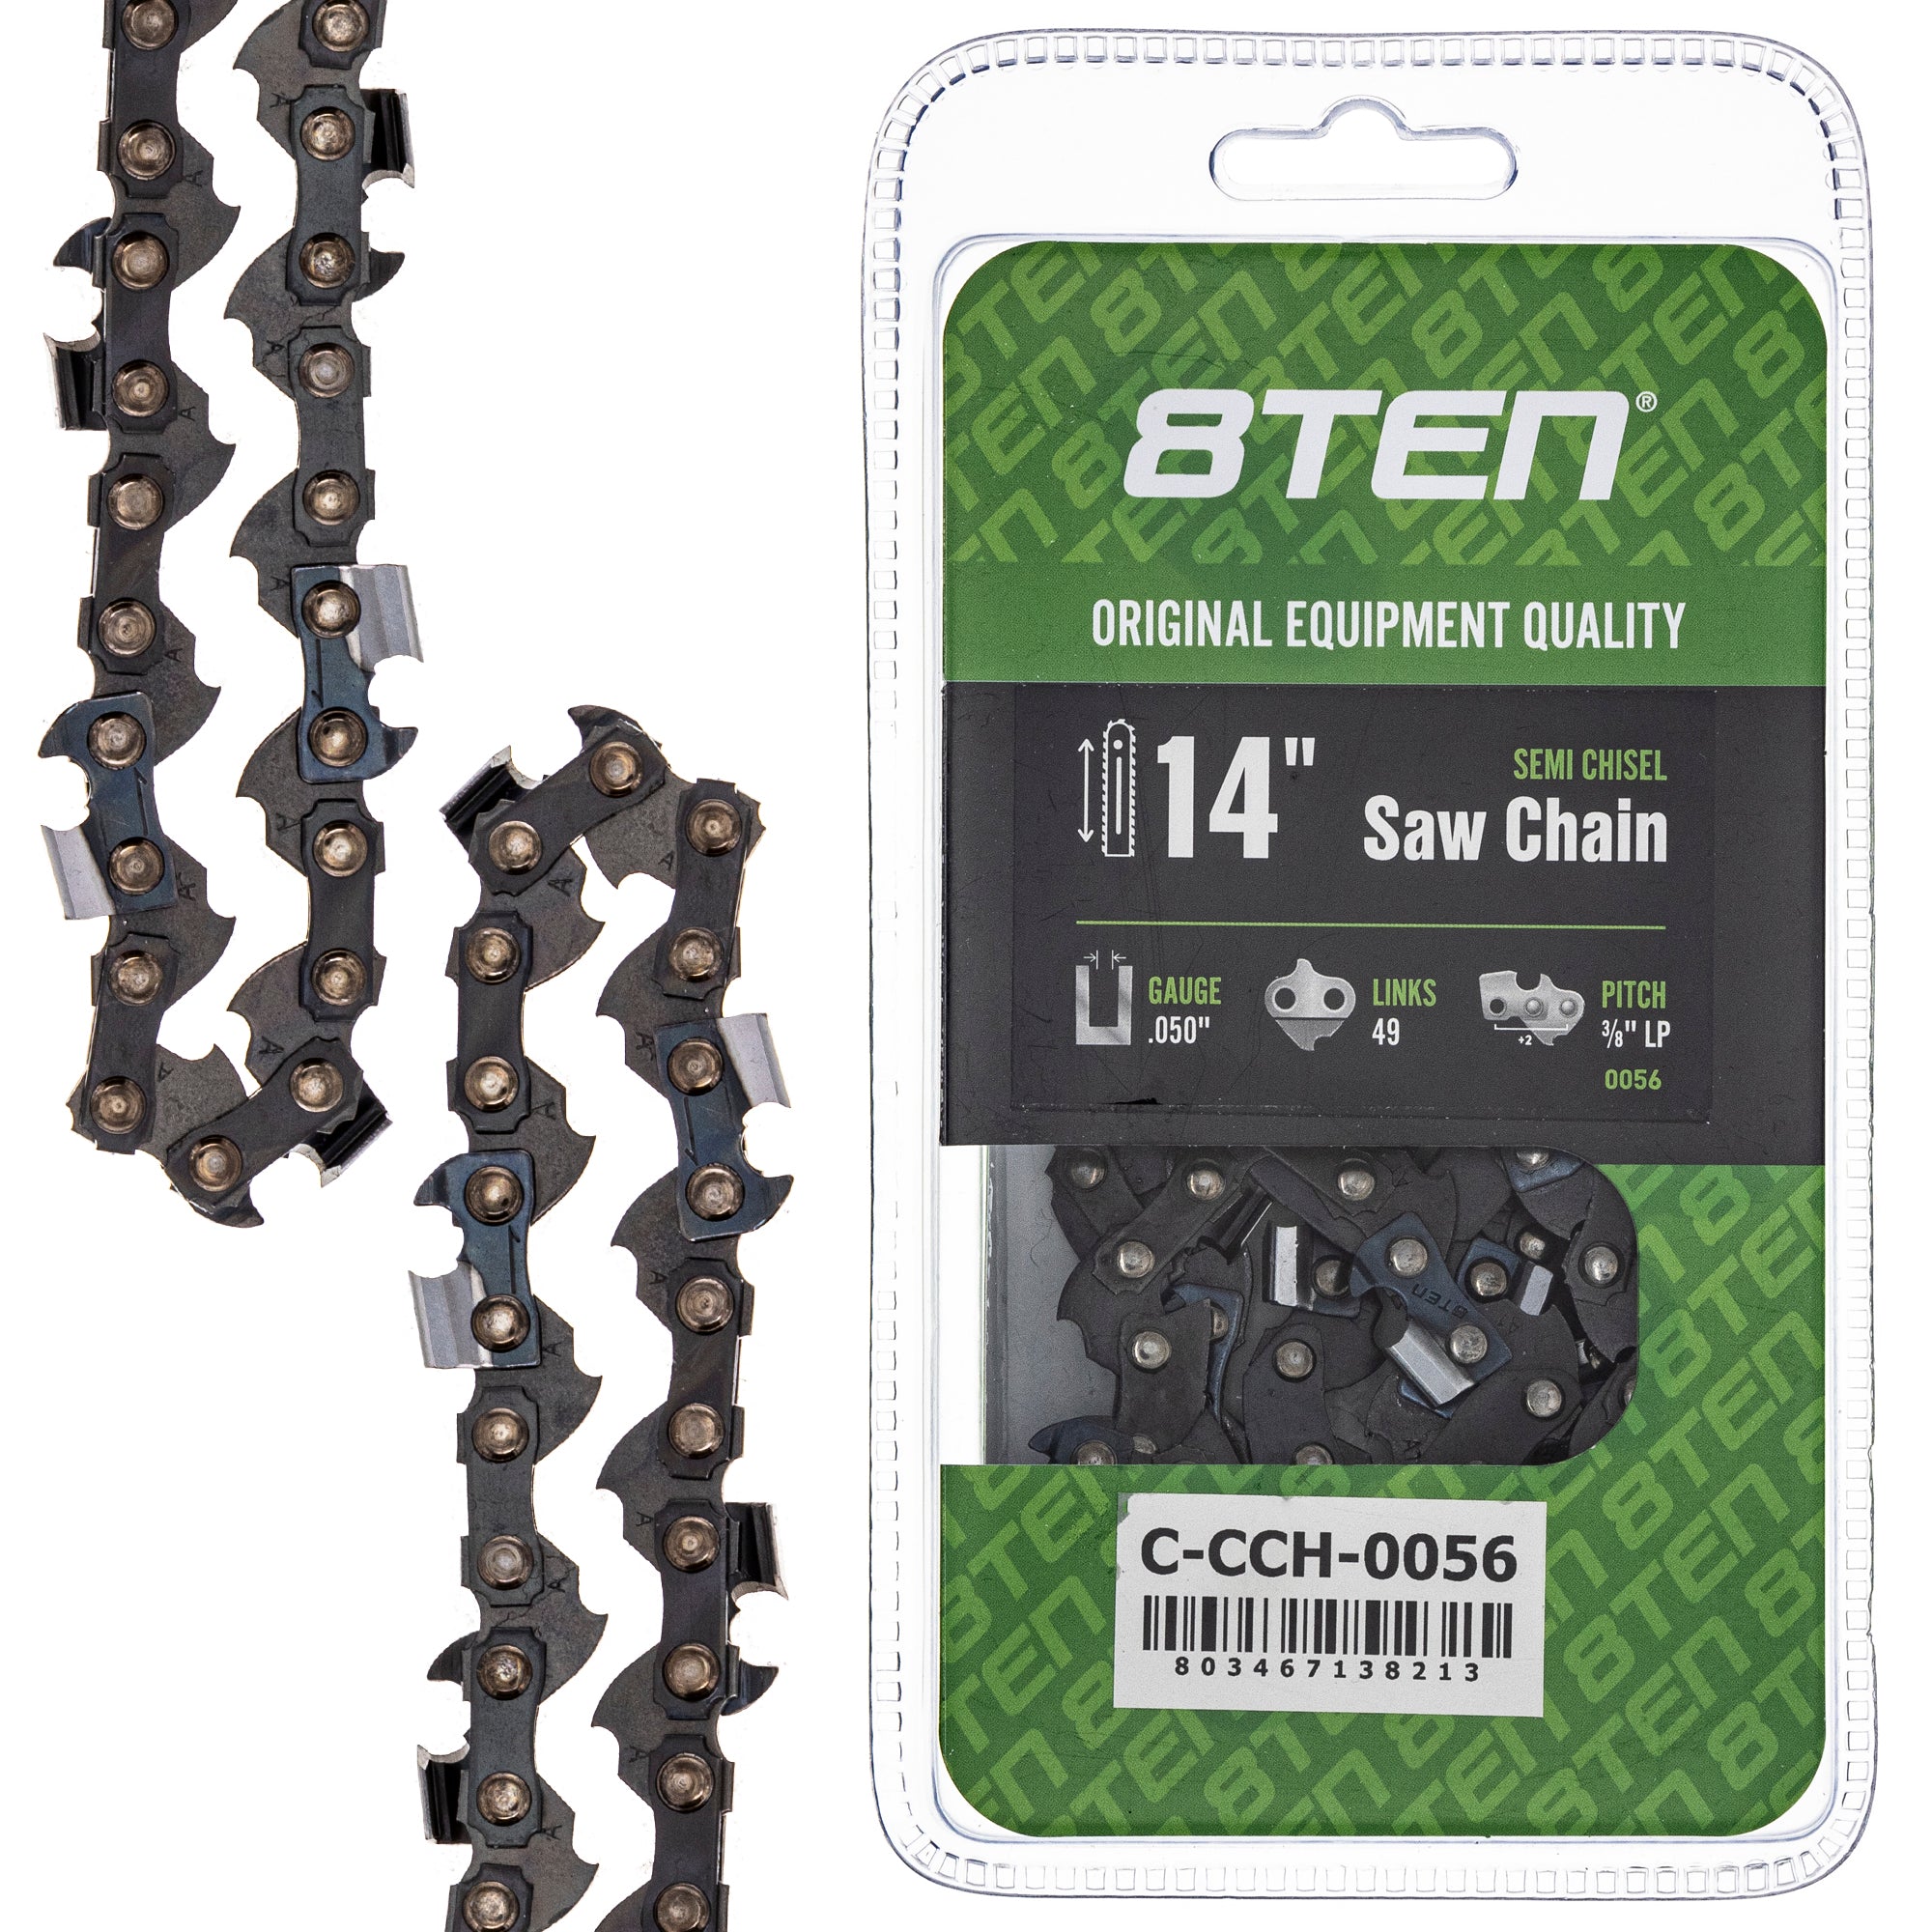 8TEN 810-CCC2278H Chain for zOTHER Lumberjack 6014 54-5724 54-5722